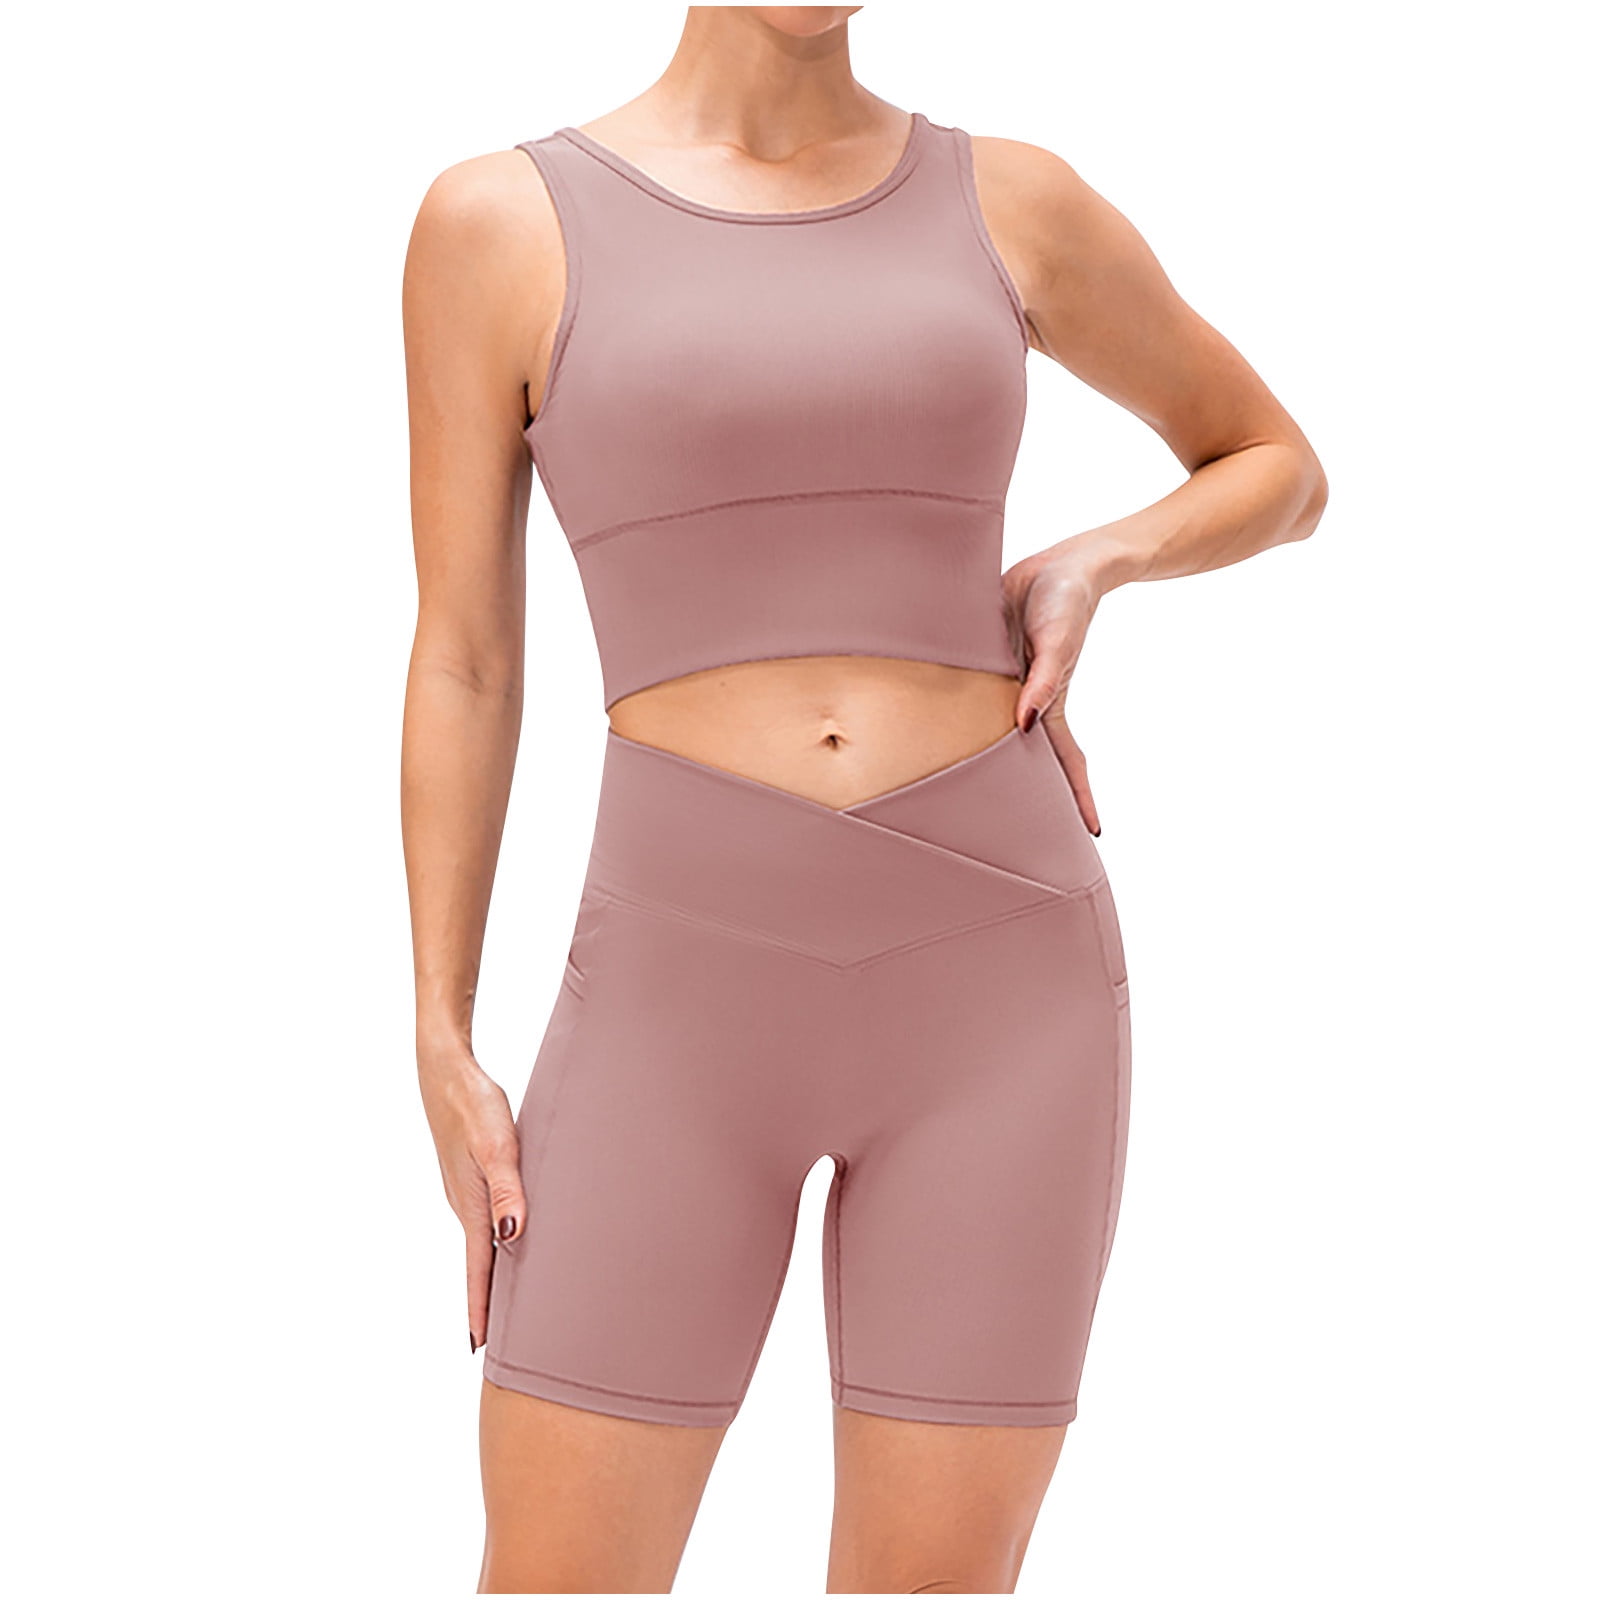 Short Workout Sets for Women Compression Yoga Outfits Bikers Crop Tank Tops  V Waist Shorts Tracksuits Sweatsuits (Large, Pink)